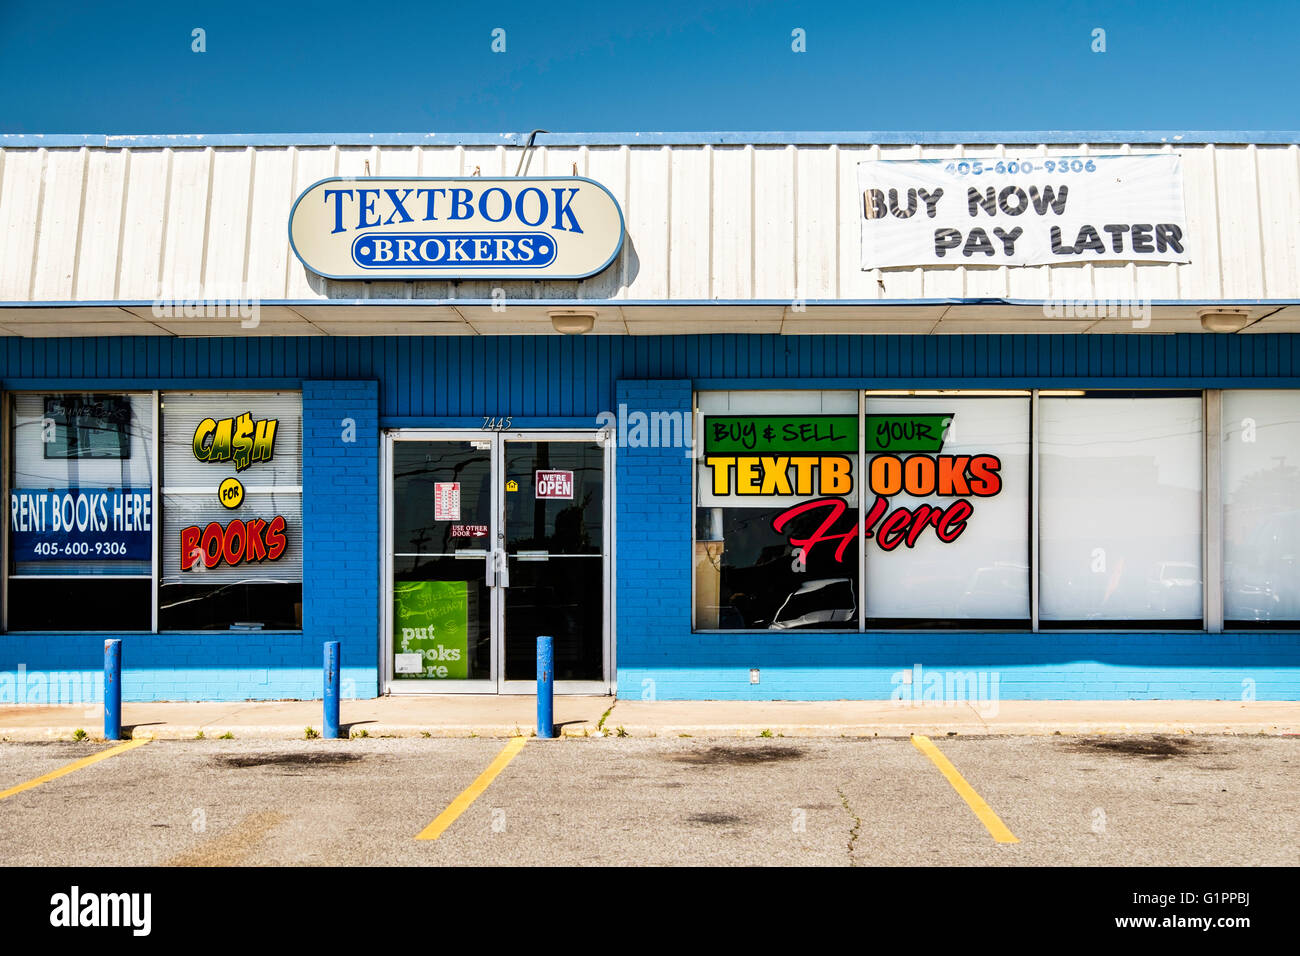 The storefront and window dressing advertising a textbook brokerage, buying and selling textbooks. USA. Stock Photo